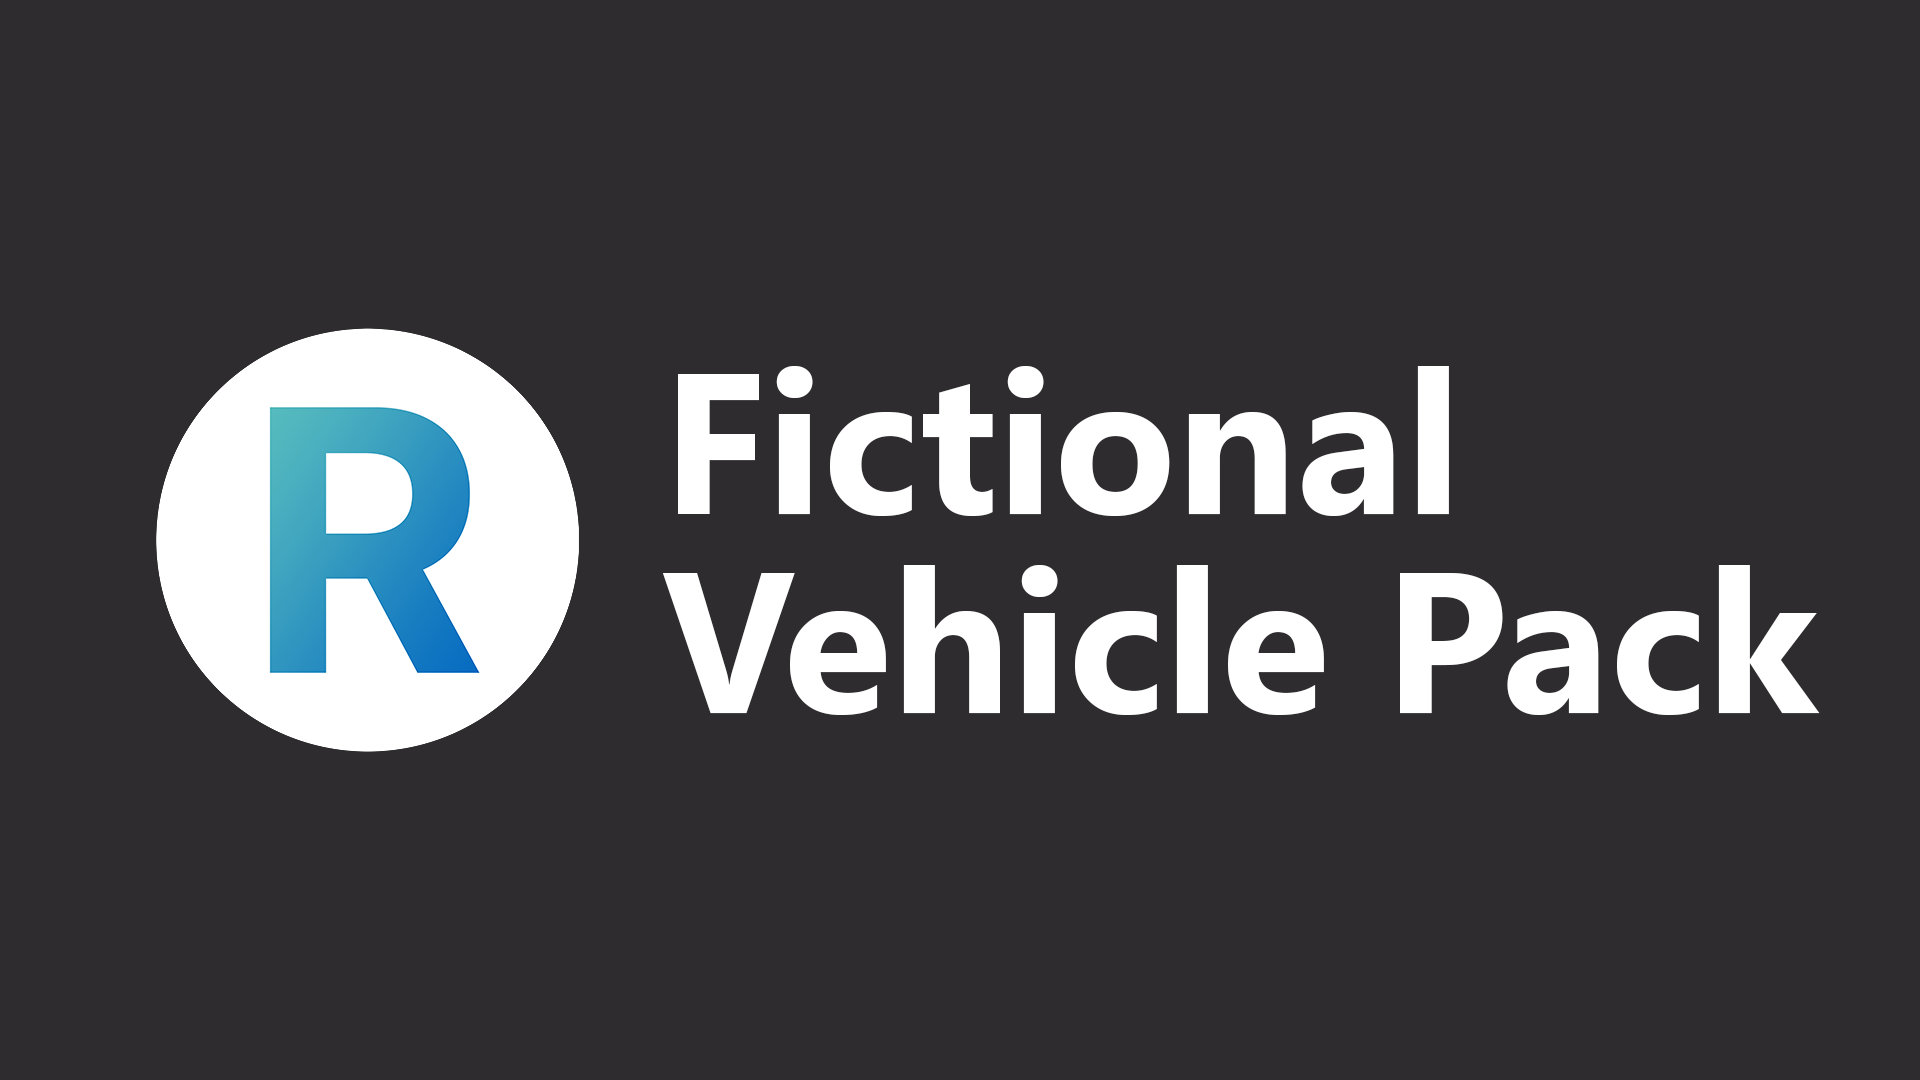 Fictional vehicle pack